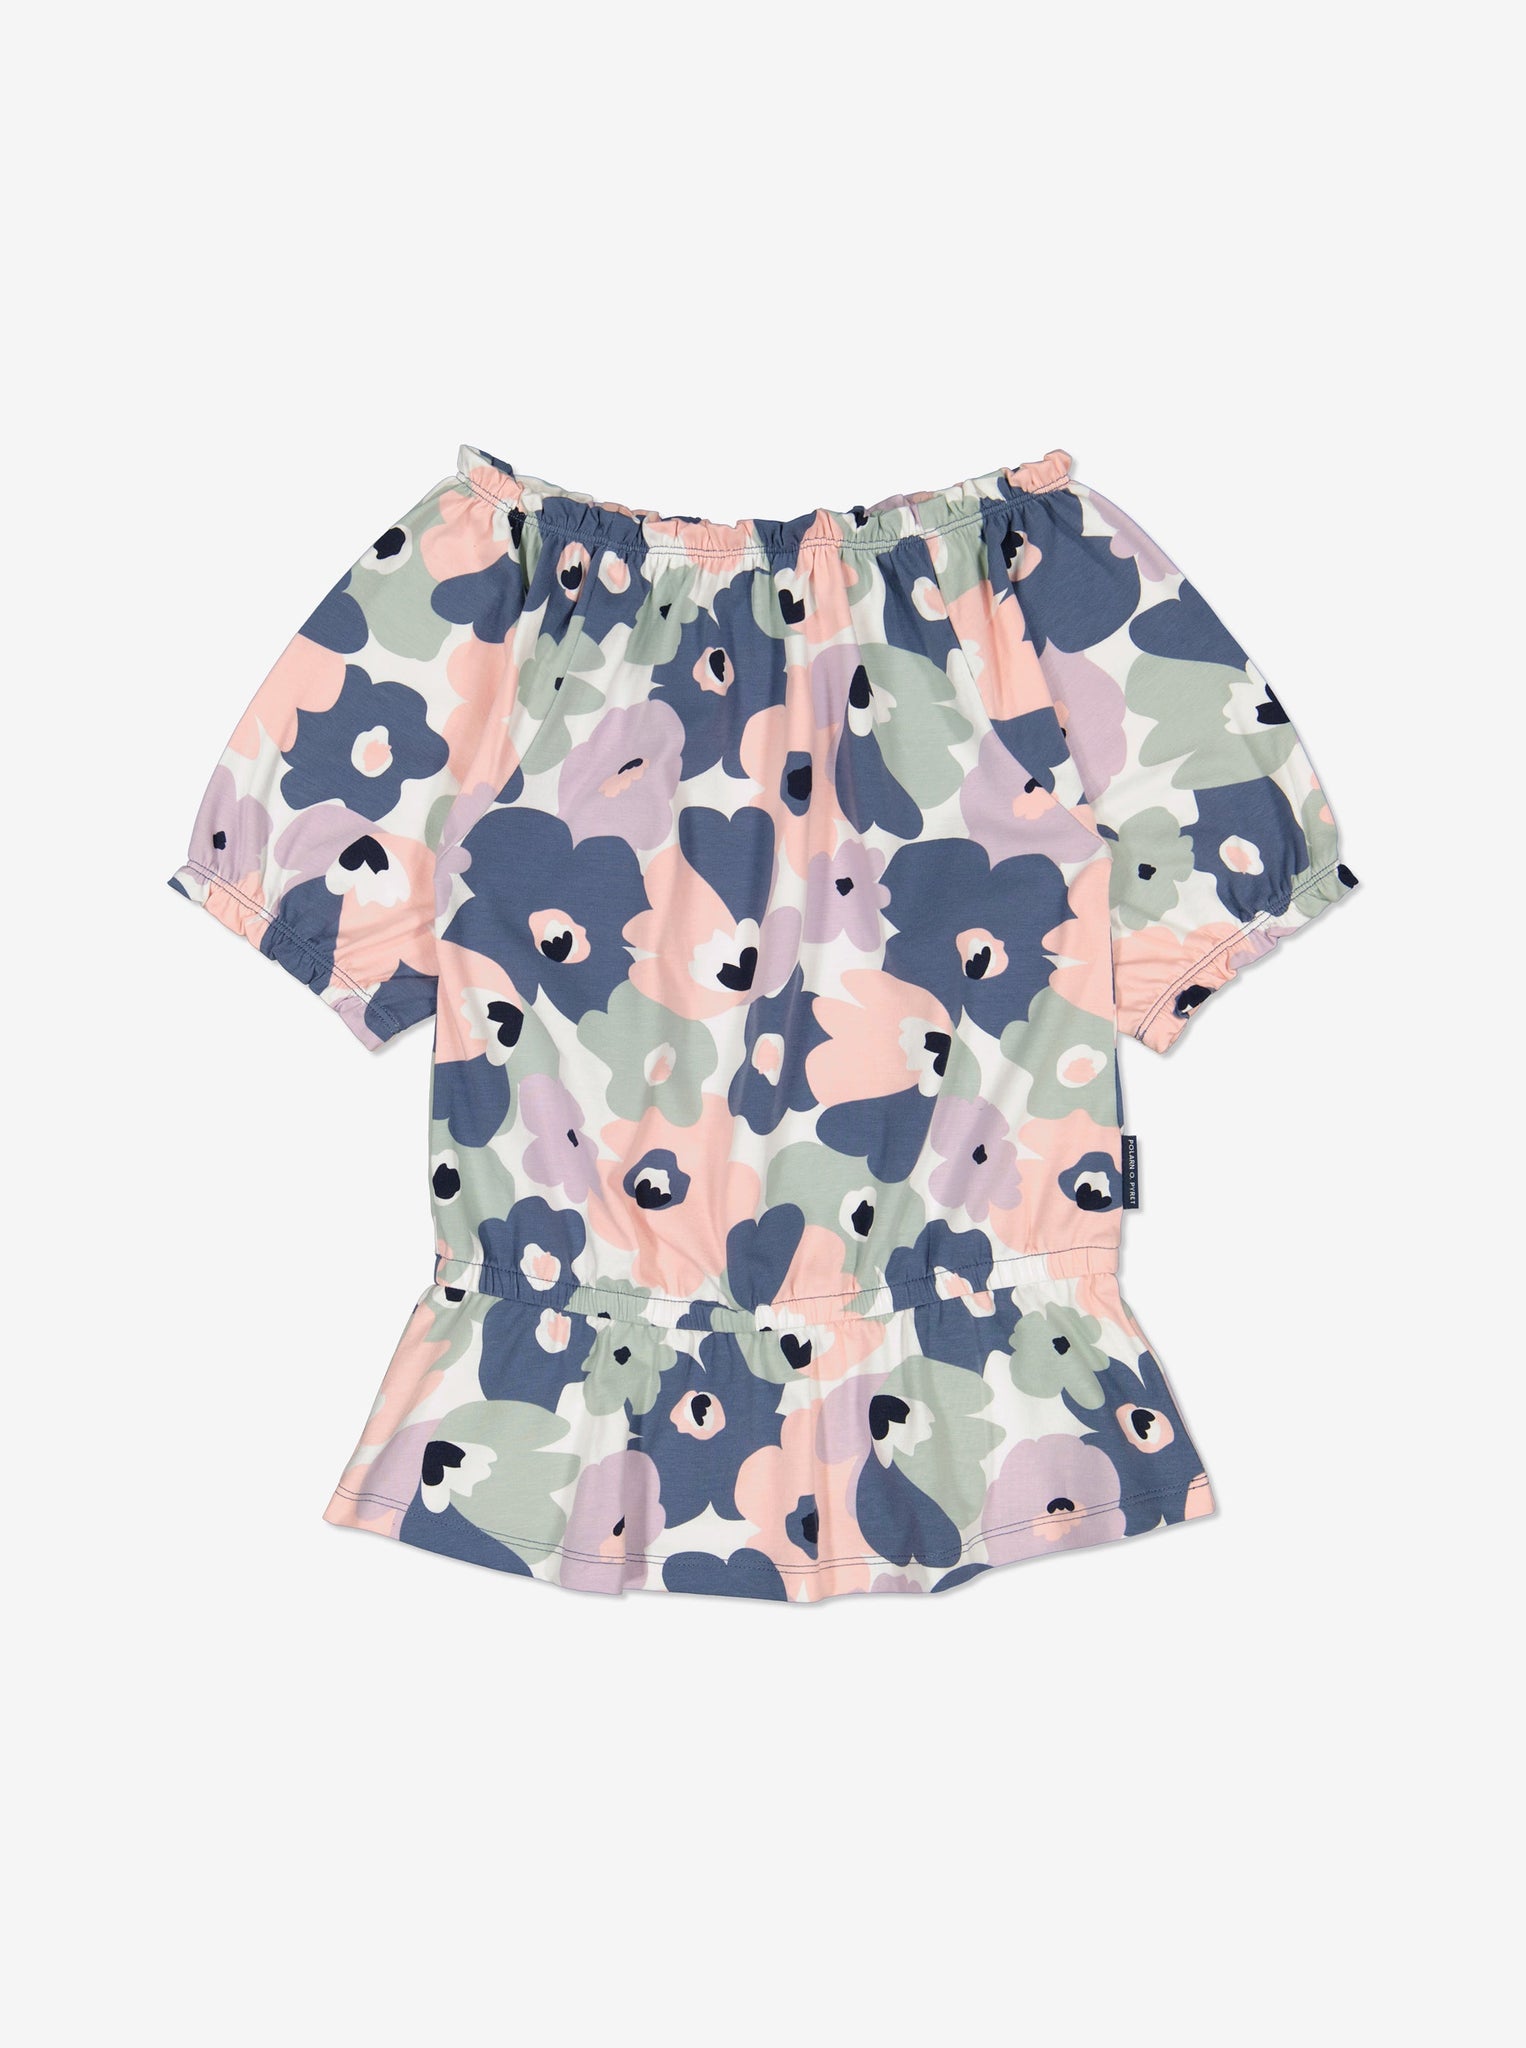  Cotton Floral Print Girls Top from Polarn O. Pyret Kidswear. Made using ethically sourced materials.